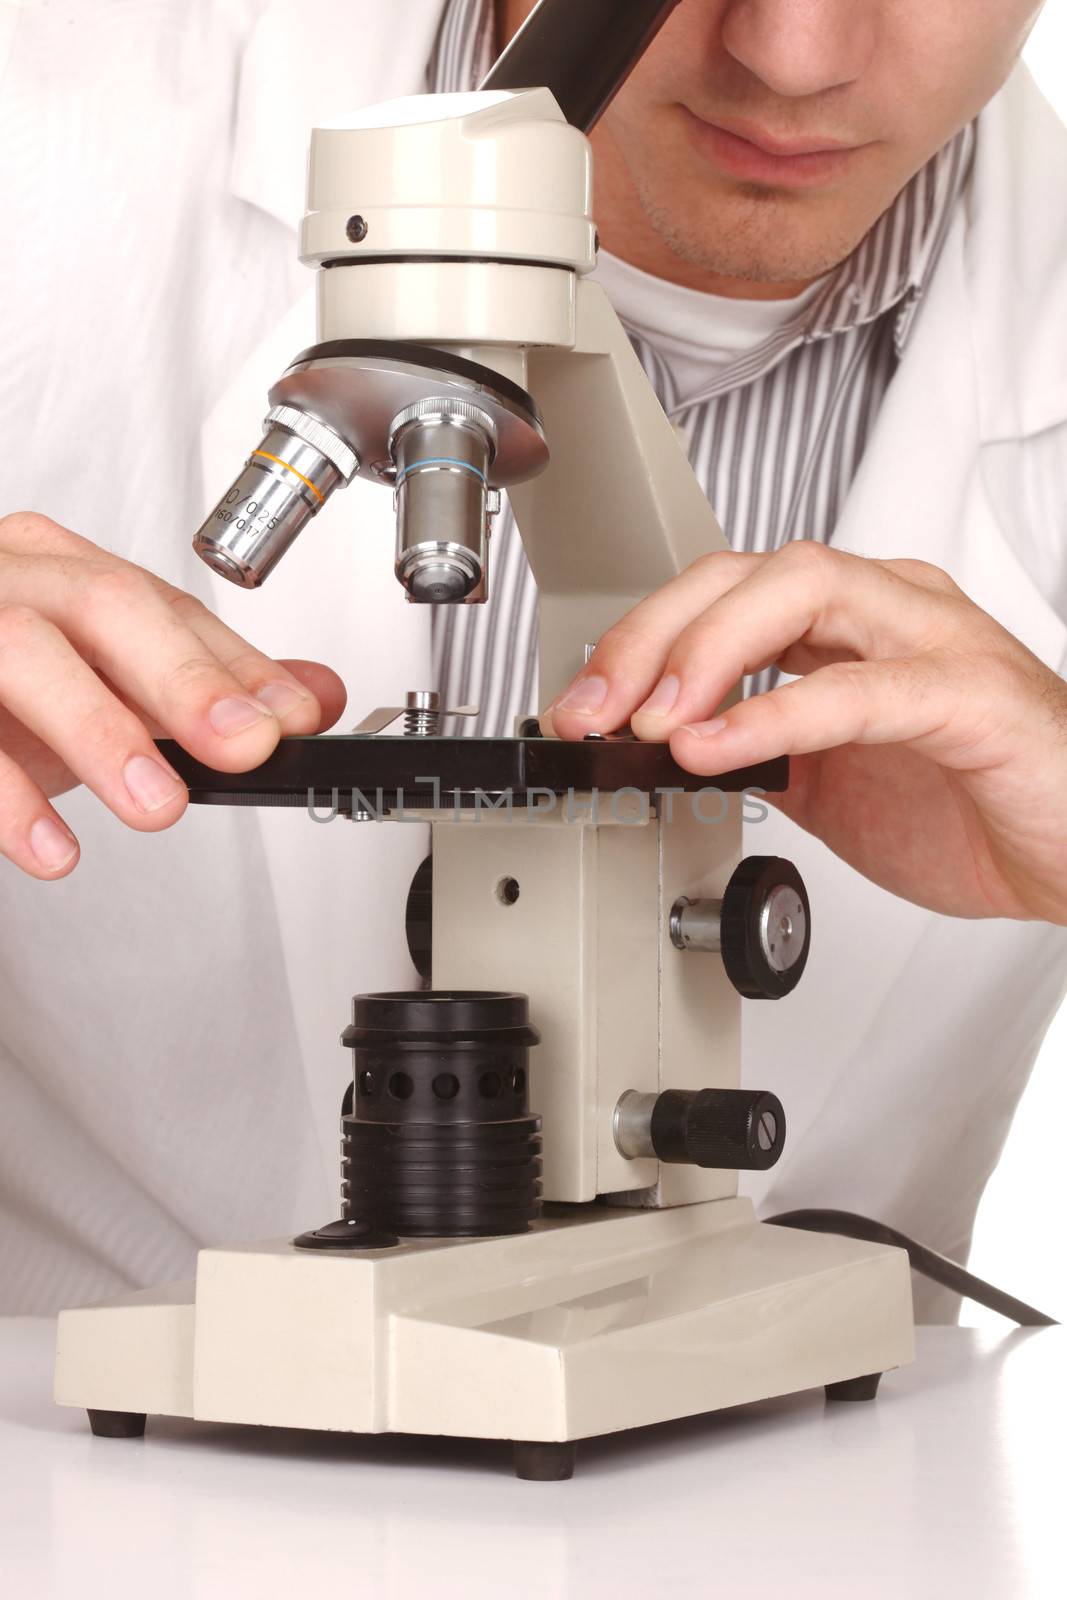 Scientist At Work Using a Microscope on White